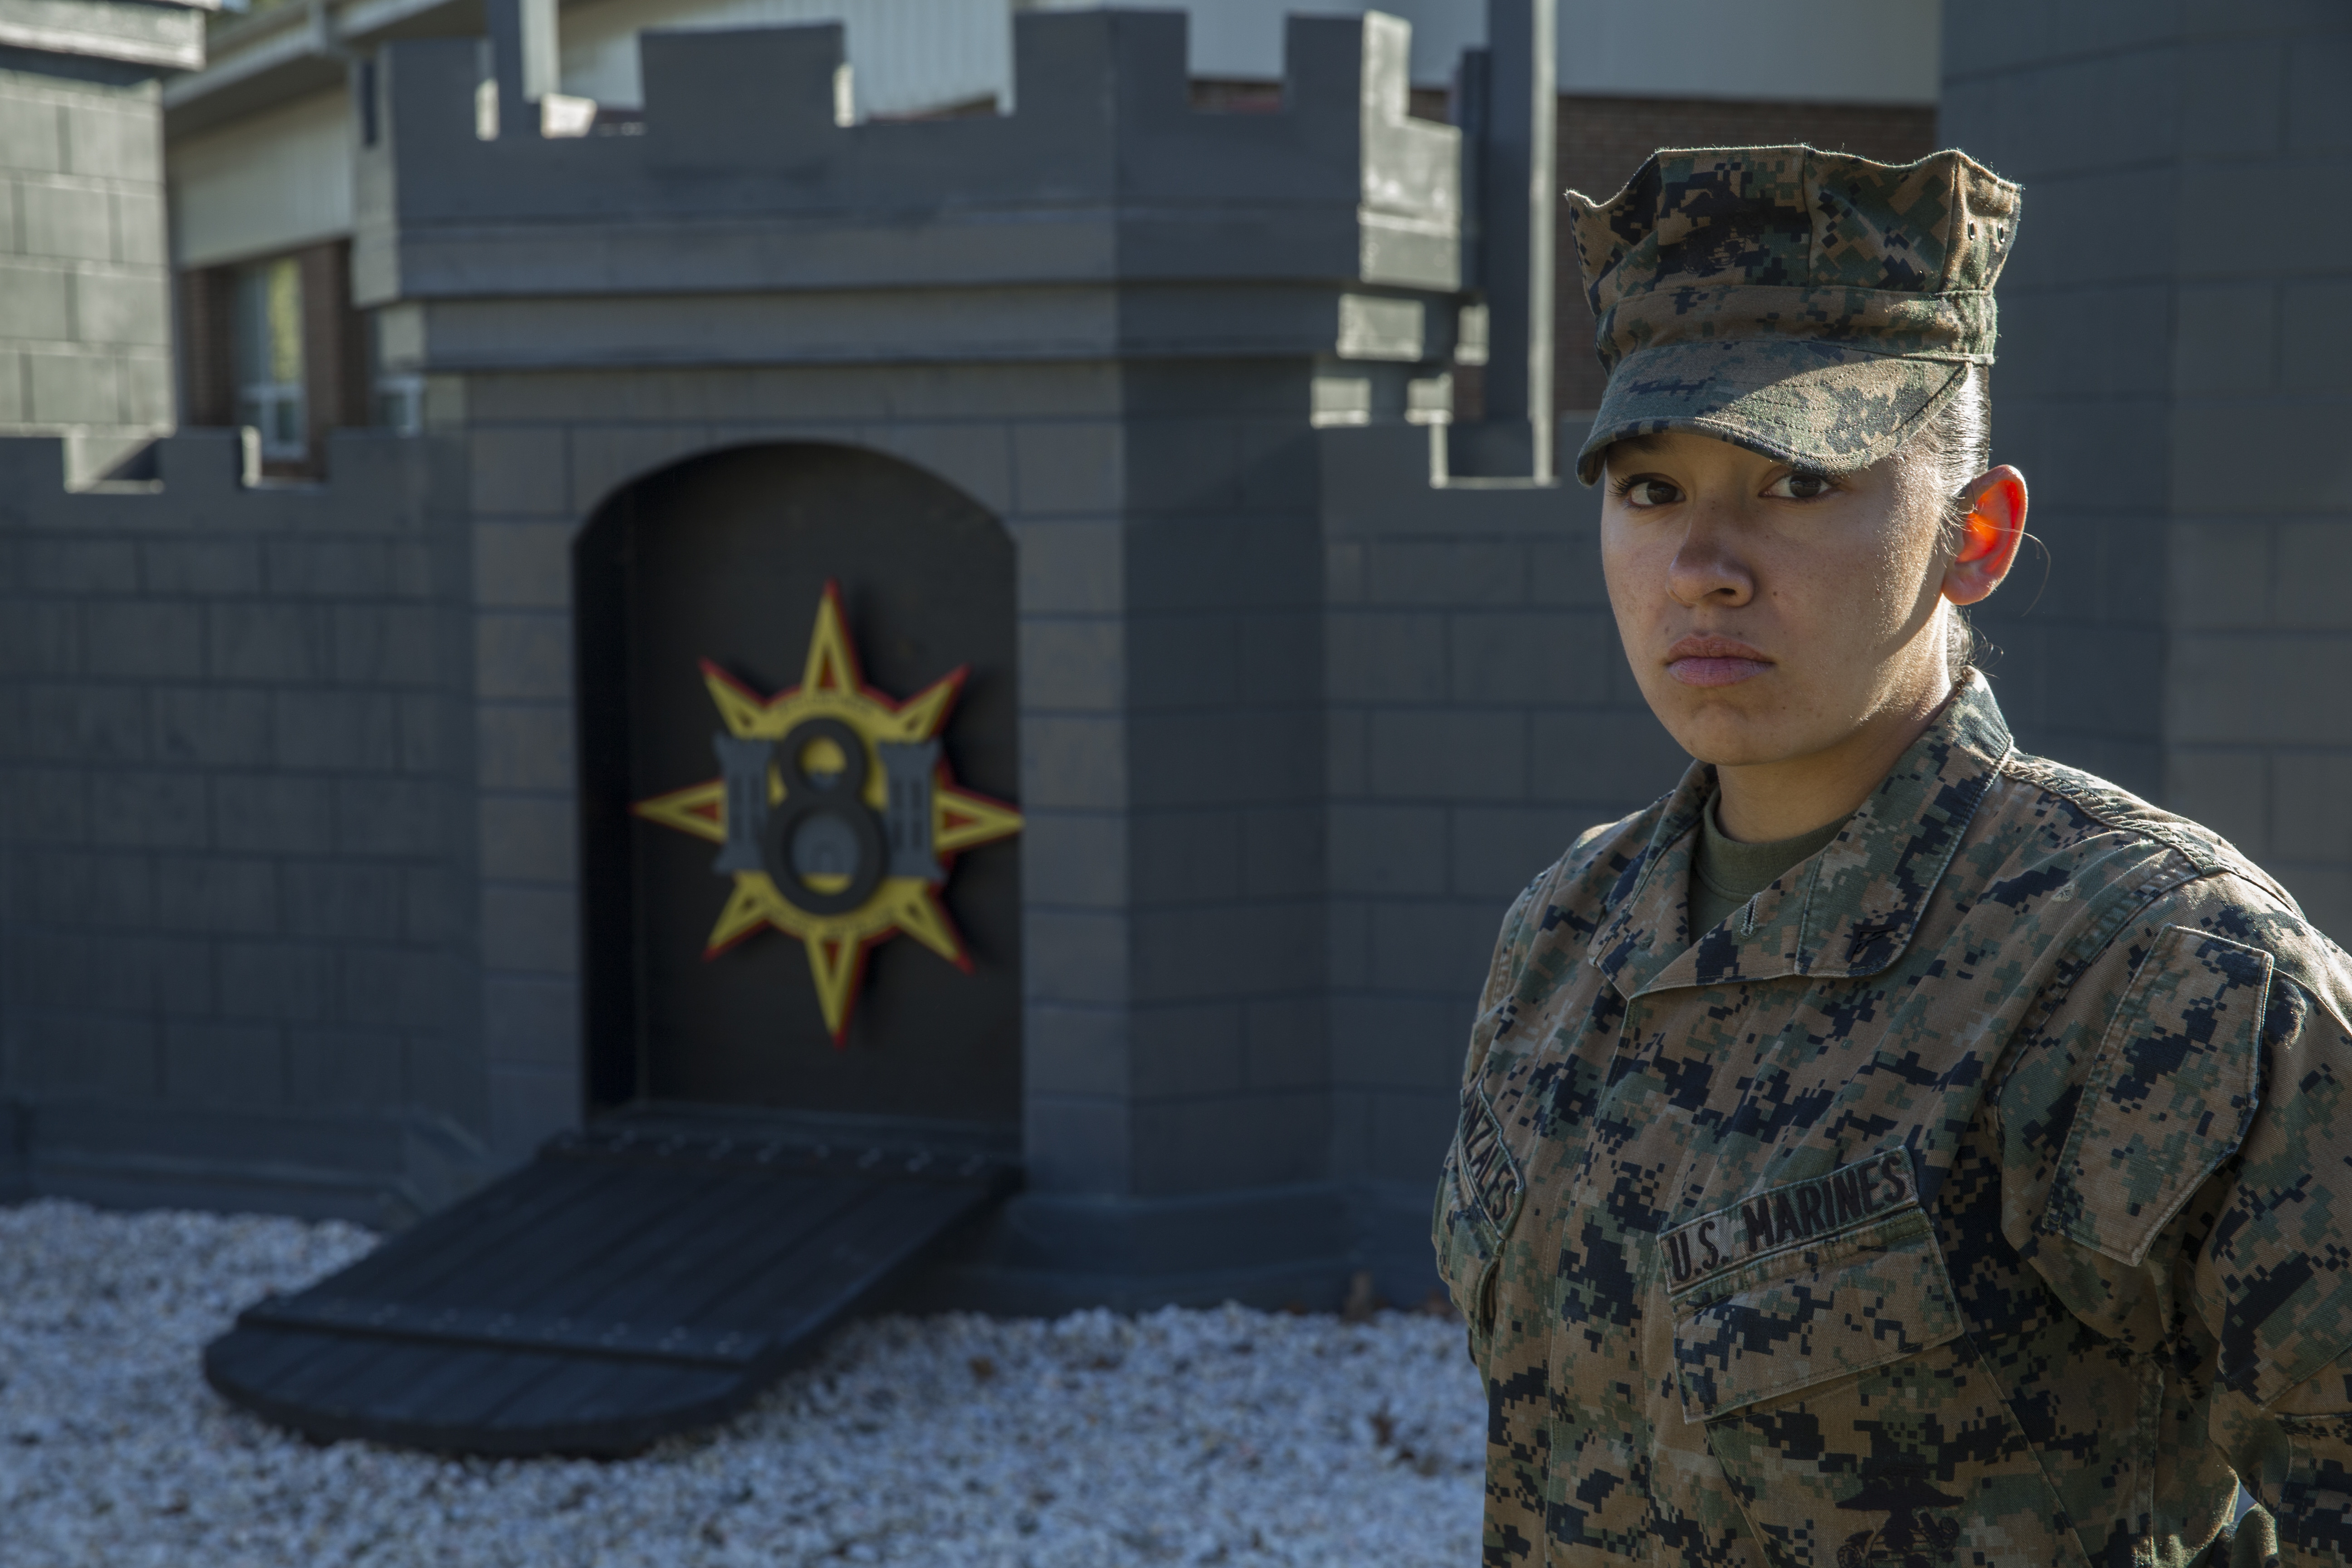 Lance Cpl. Gabriela Gonzales is 2nd MLG 2017 Marine of the Year